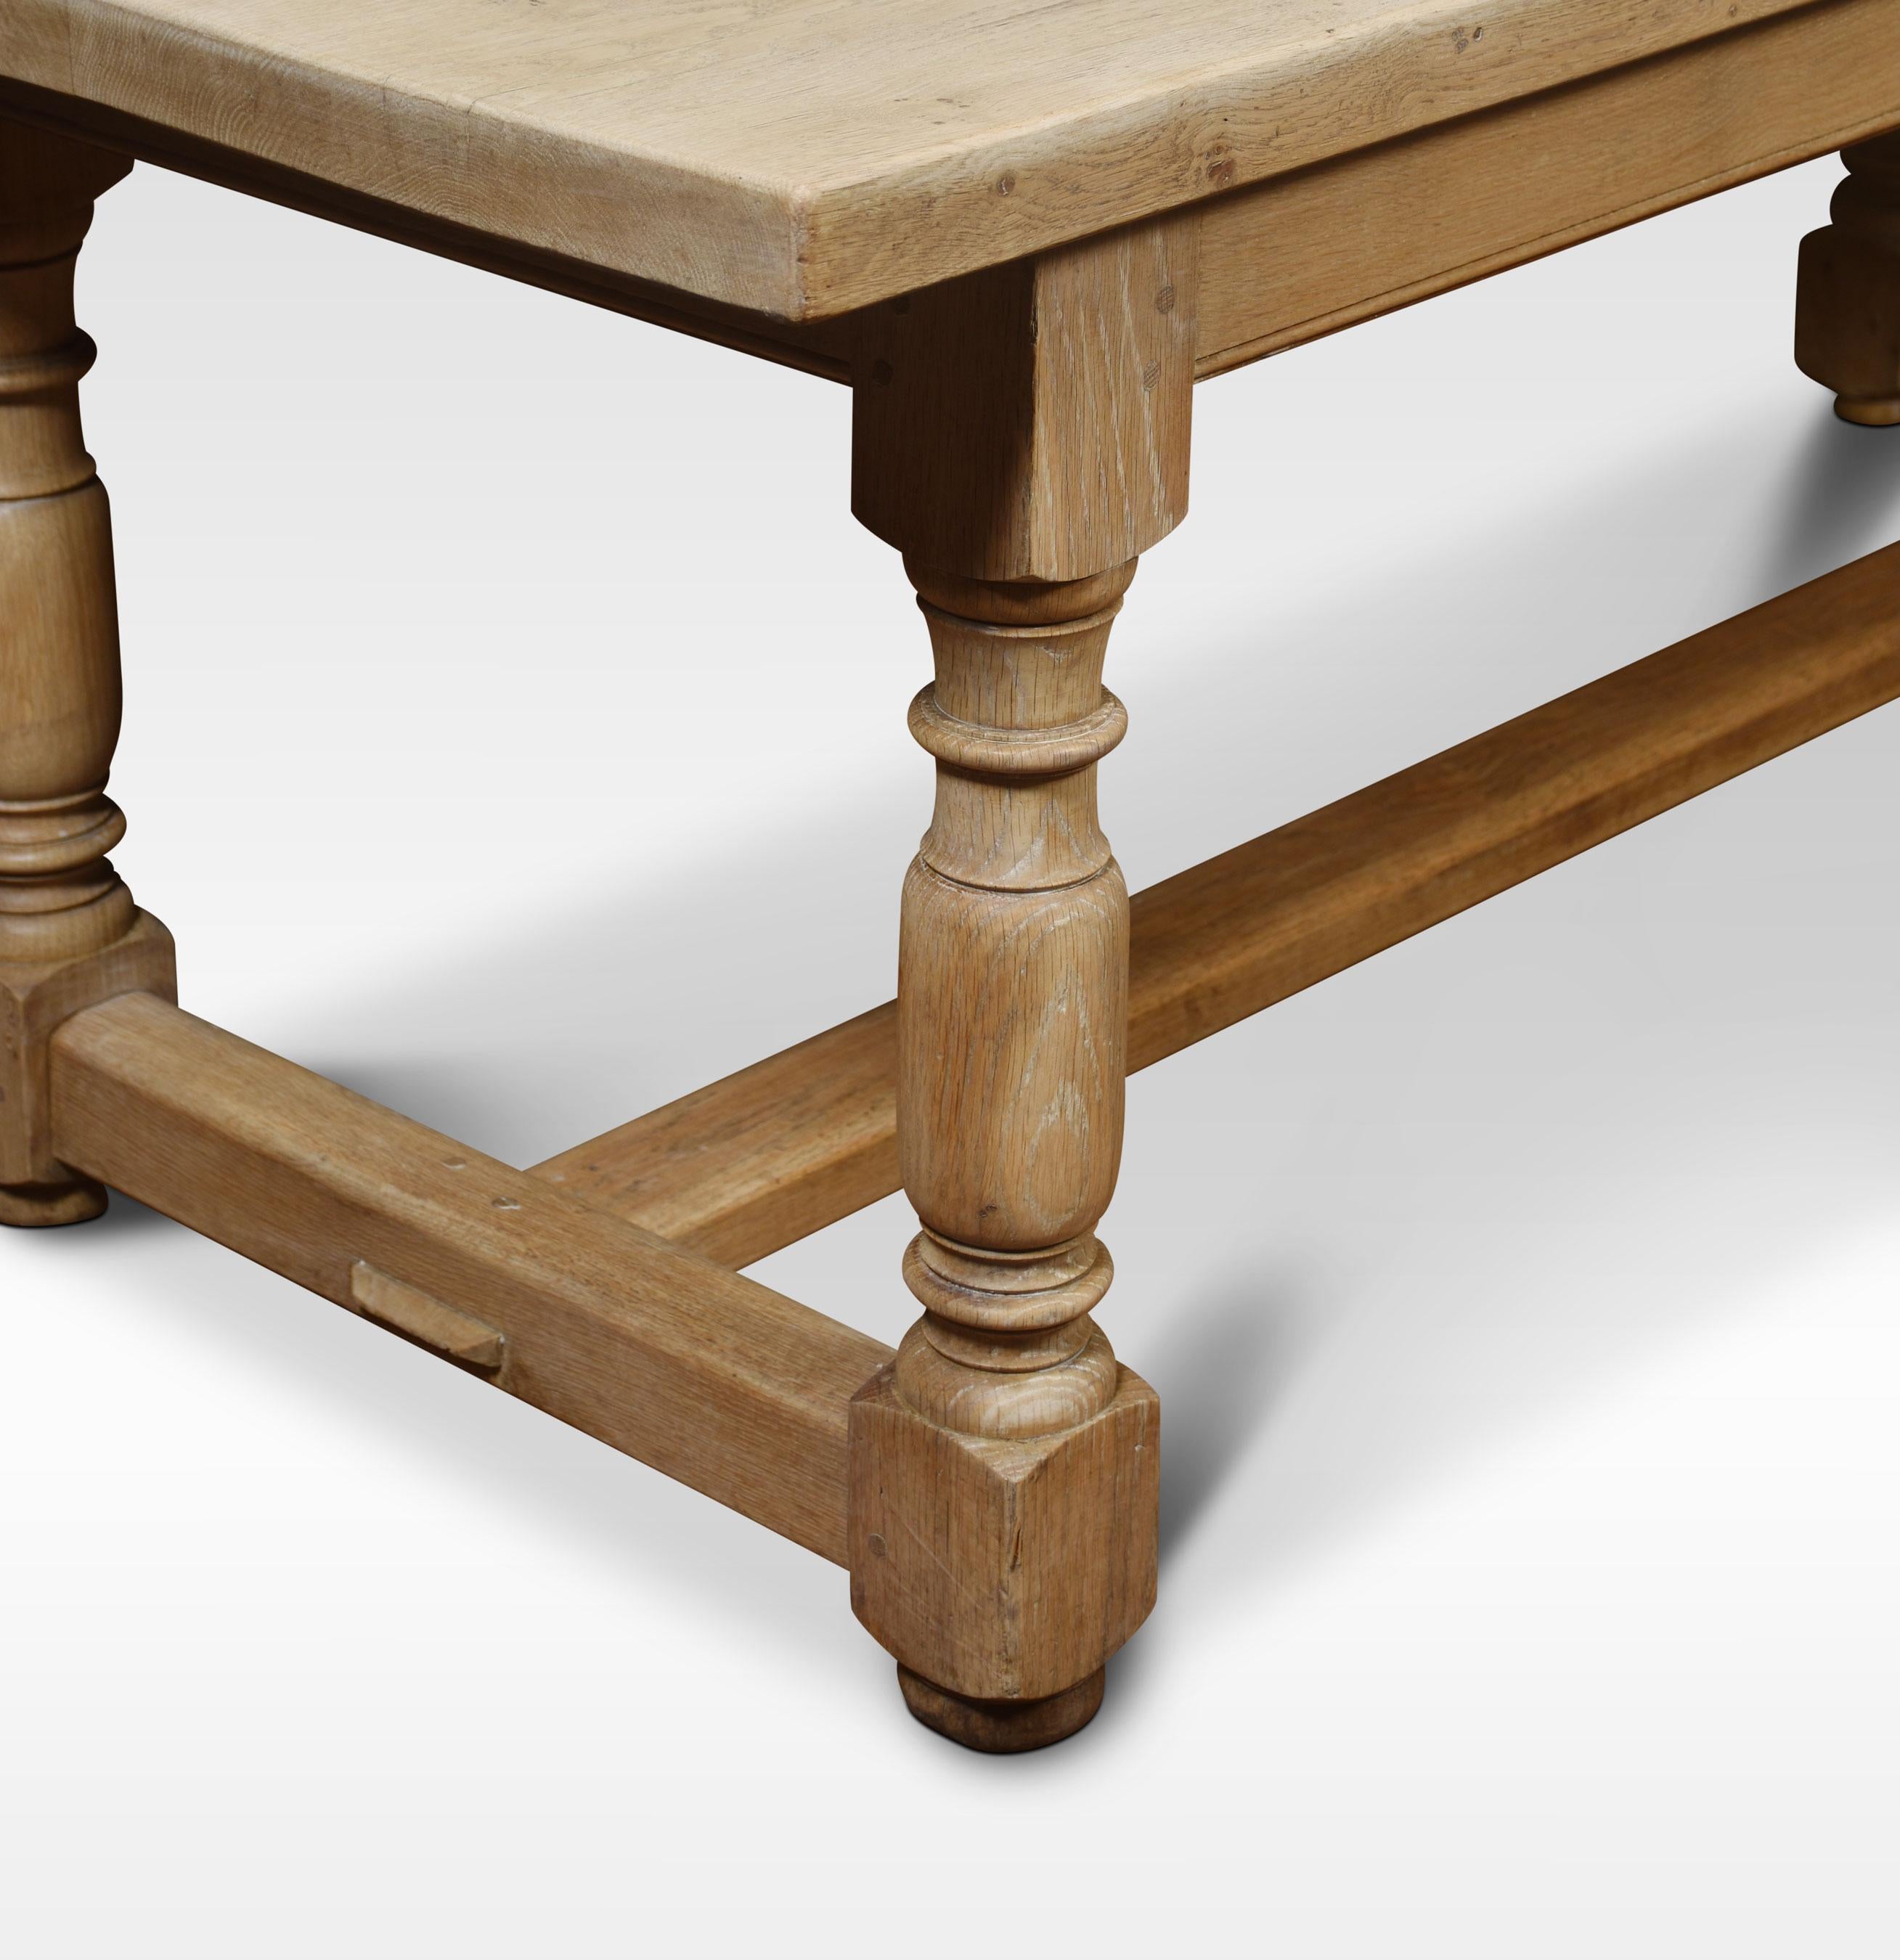 British Bleached Oak Plank Top Refectory Table